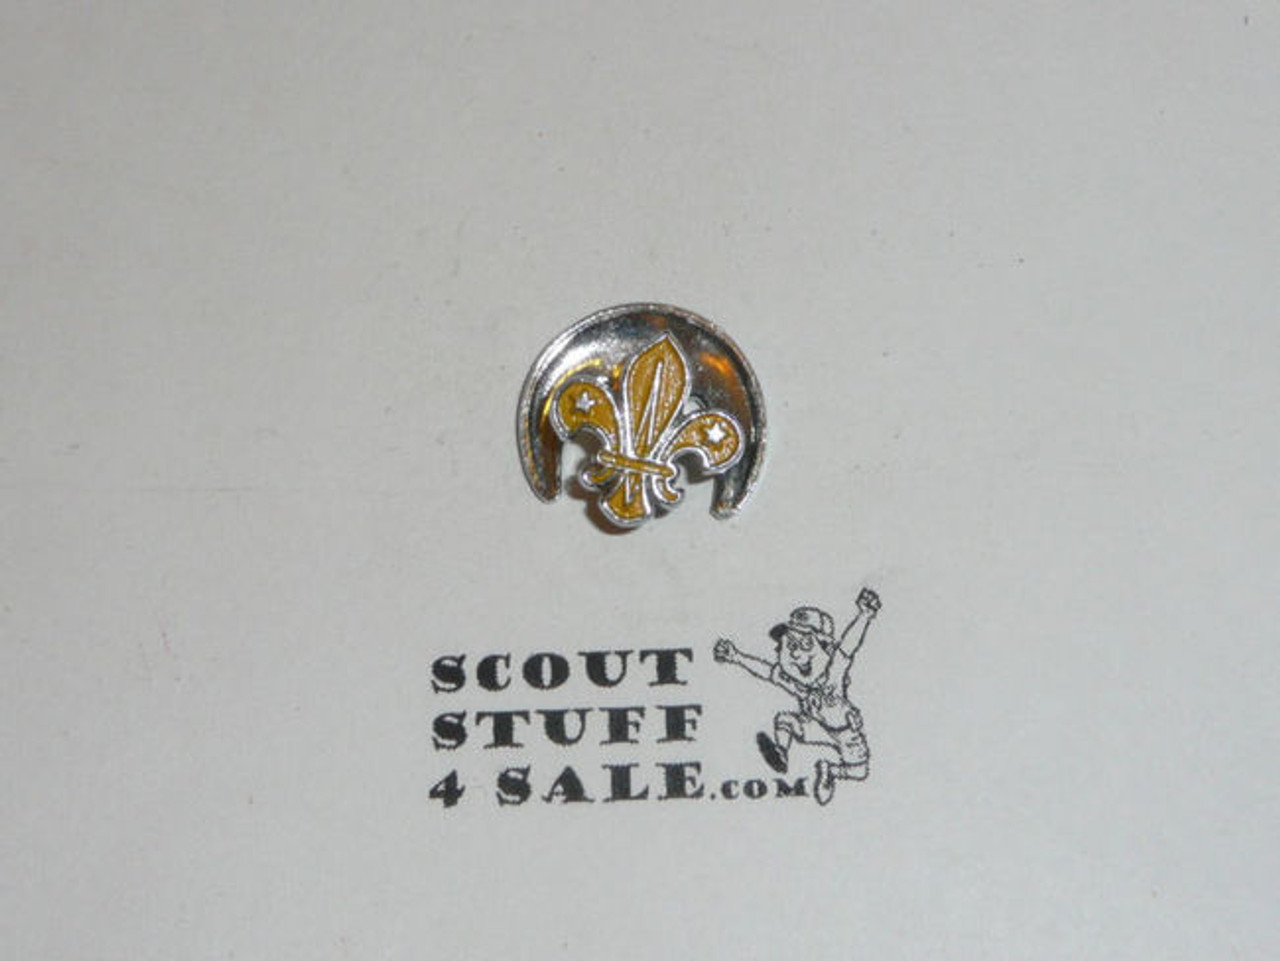 OLD Non USA boy scout pin, May be British, Old Button hole round back, PC3